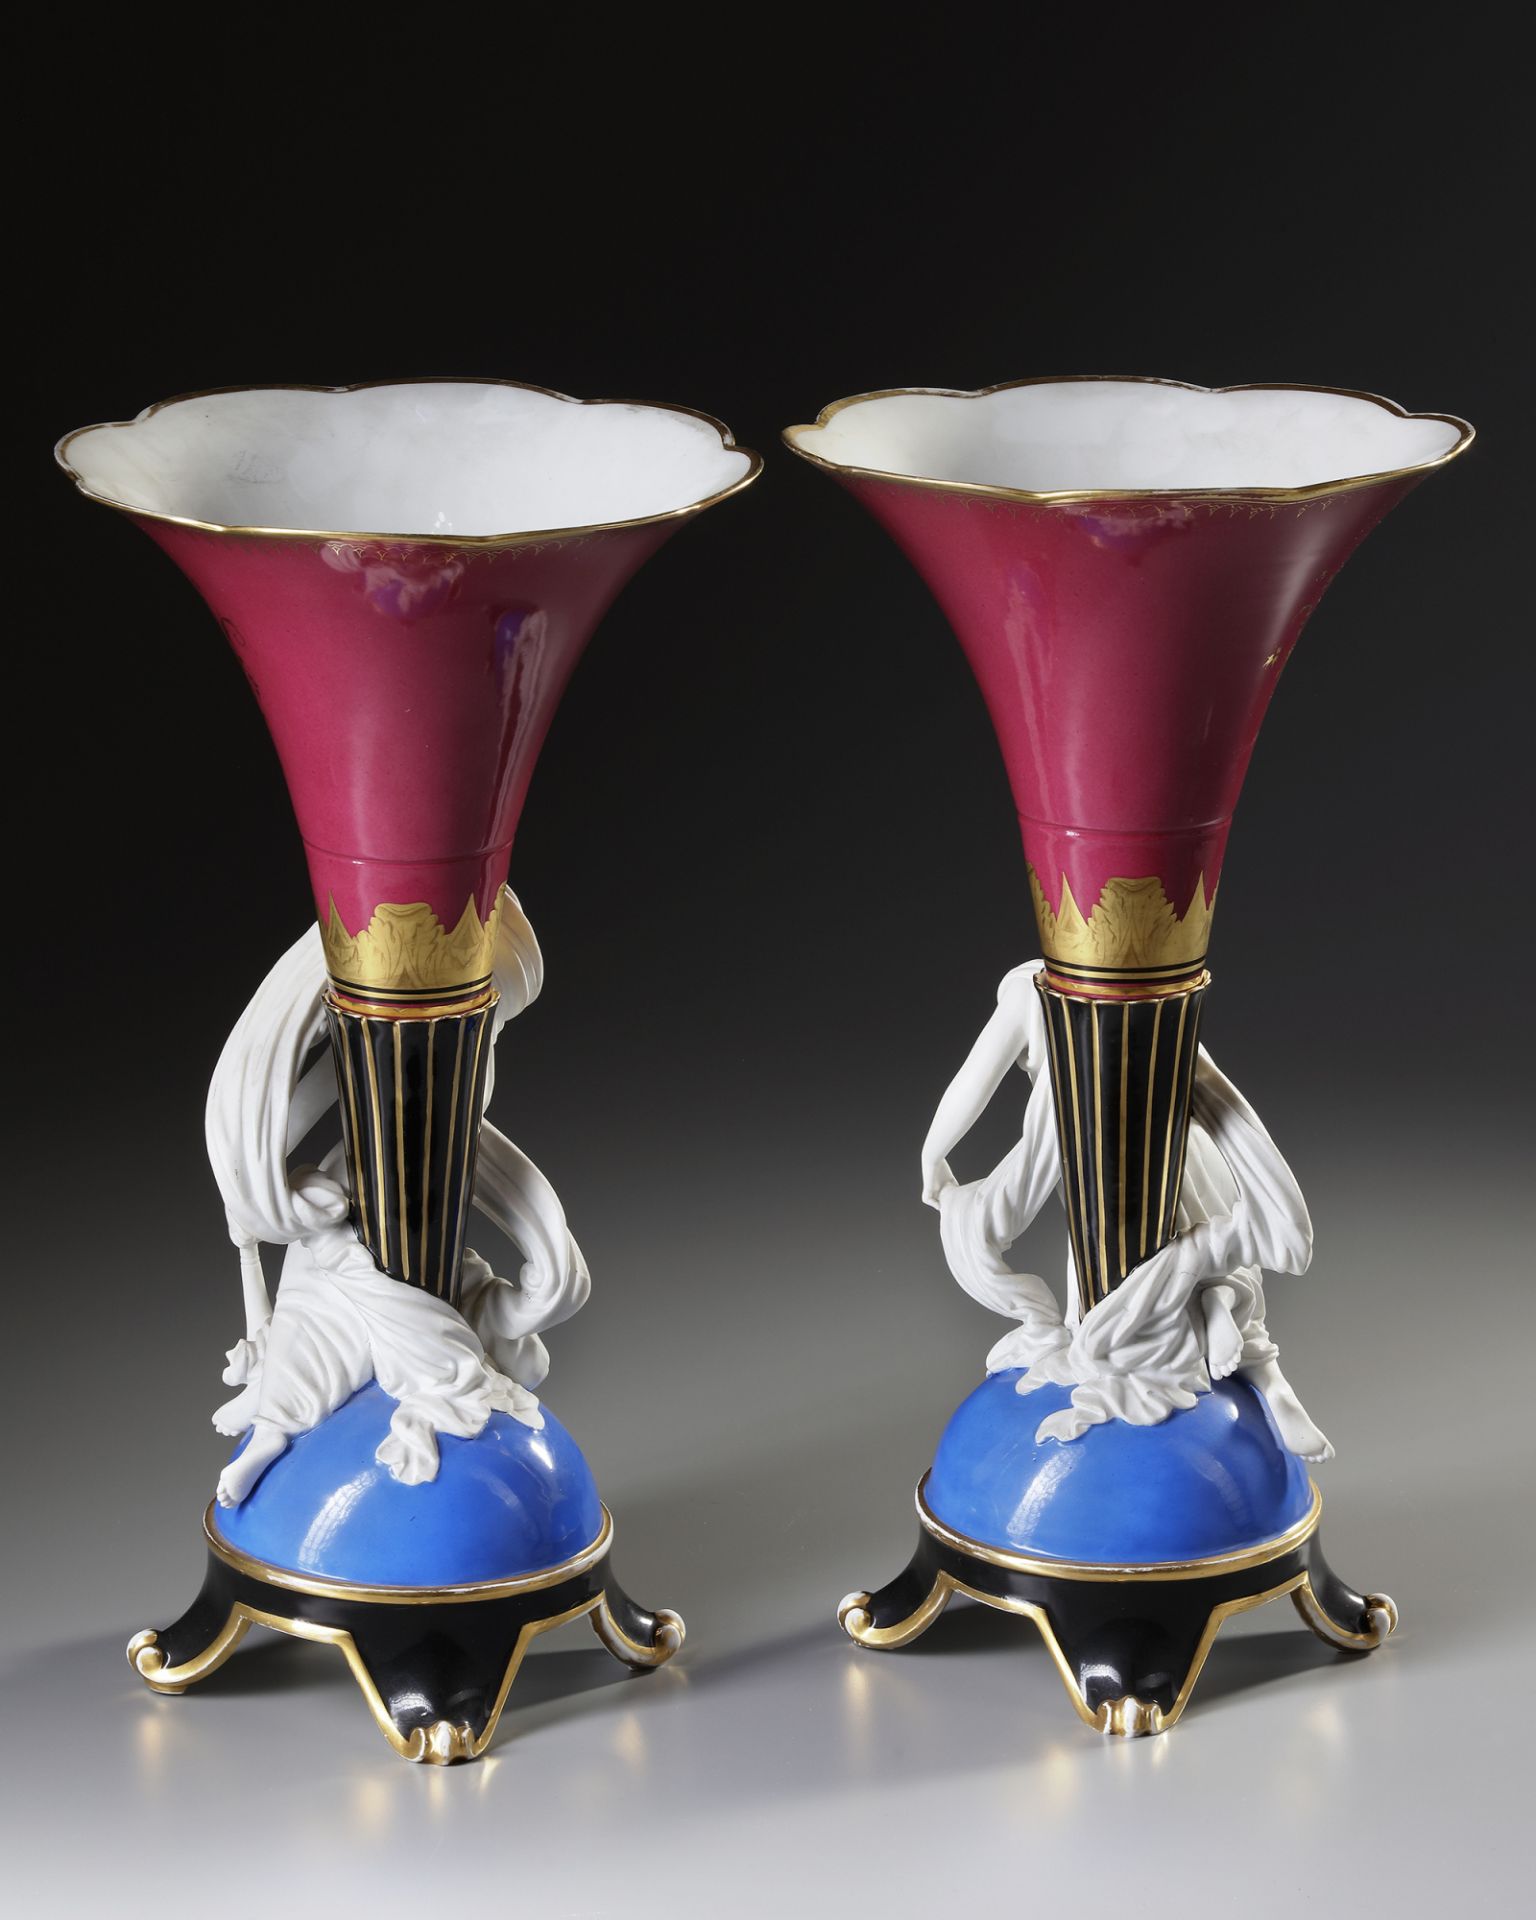 A PAIR OF FRENCH PORCELAIN AND BISCUIT VASES, 19TH CENTURY - Image 3 of 3